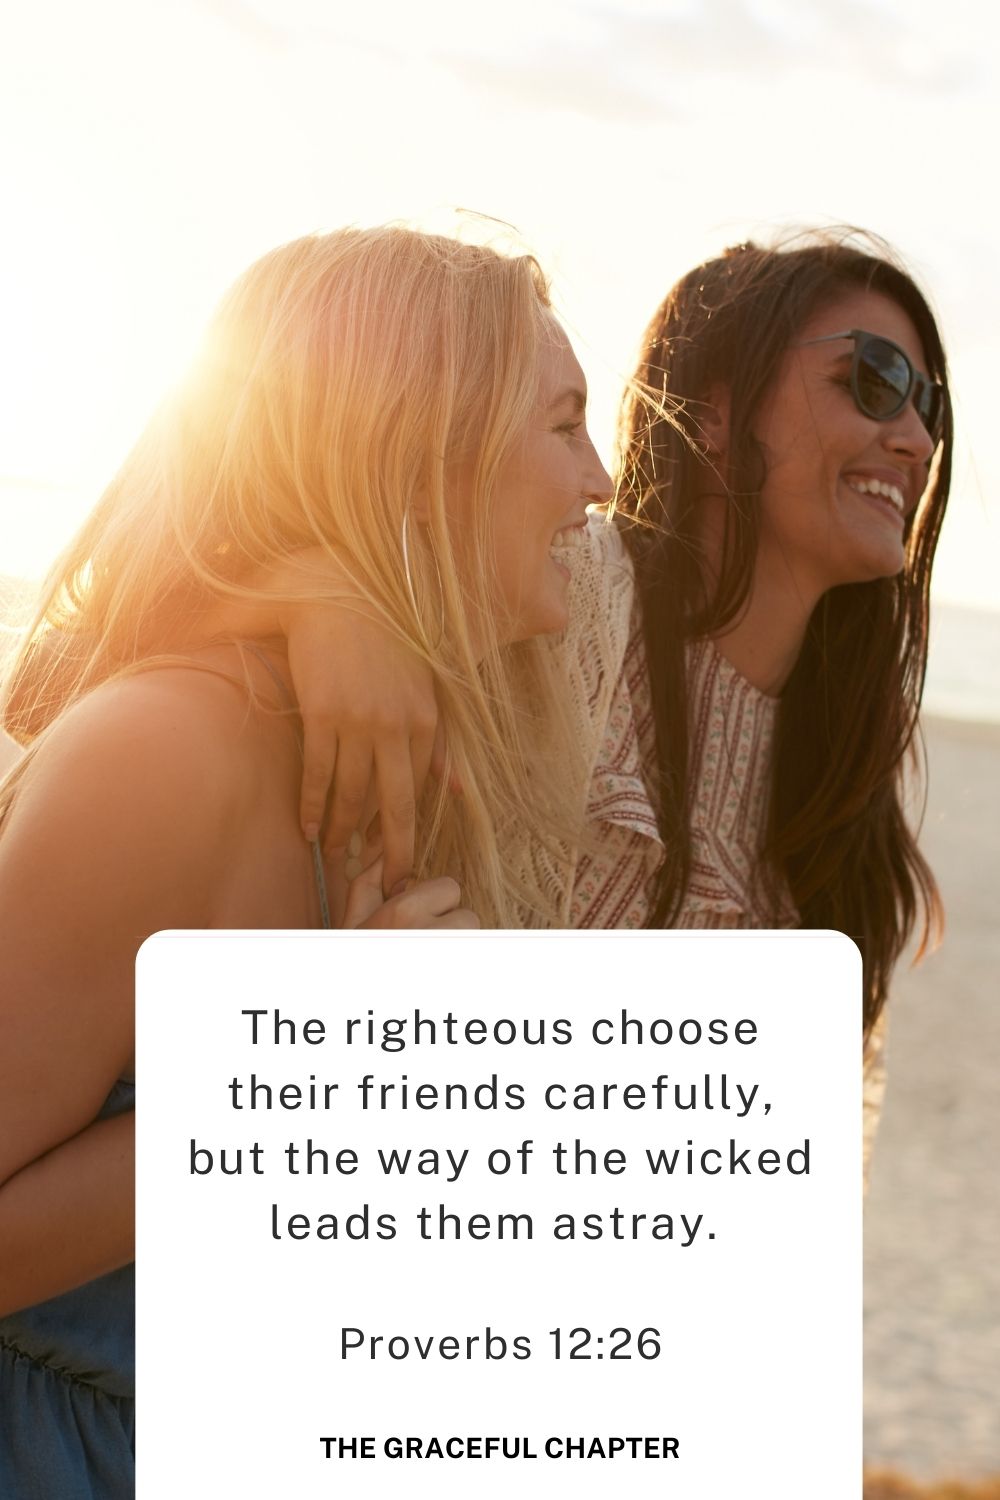 The righteous choose their friends carefully, but the way of the wicked leads them astray. 
Proverbs 12:26